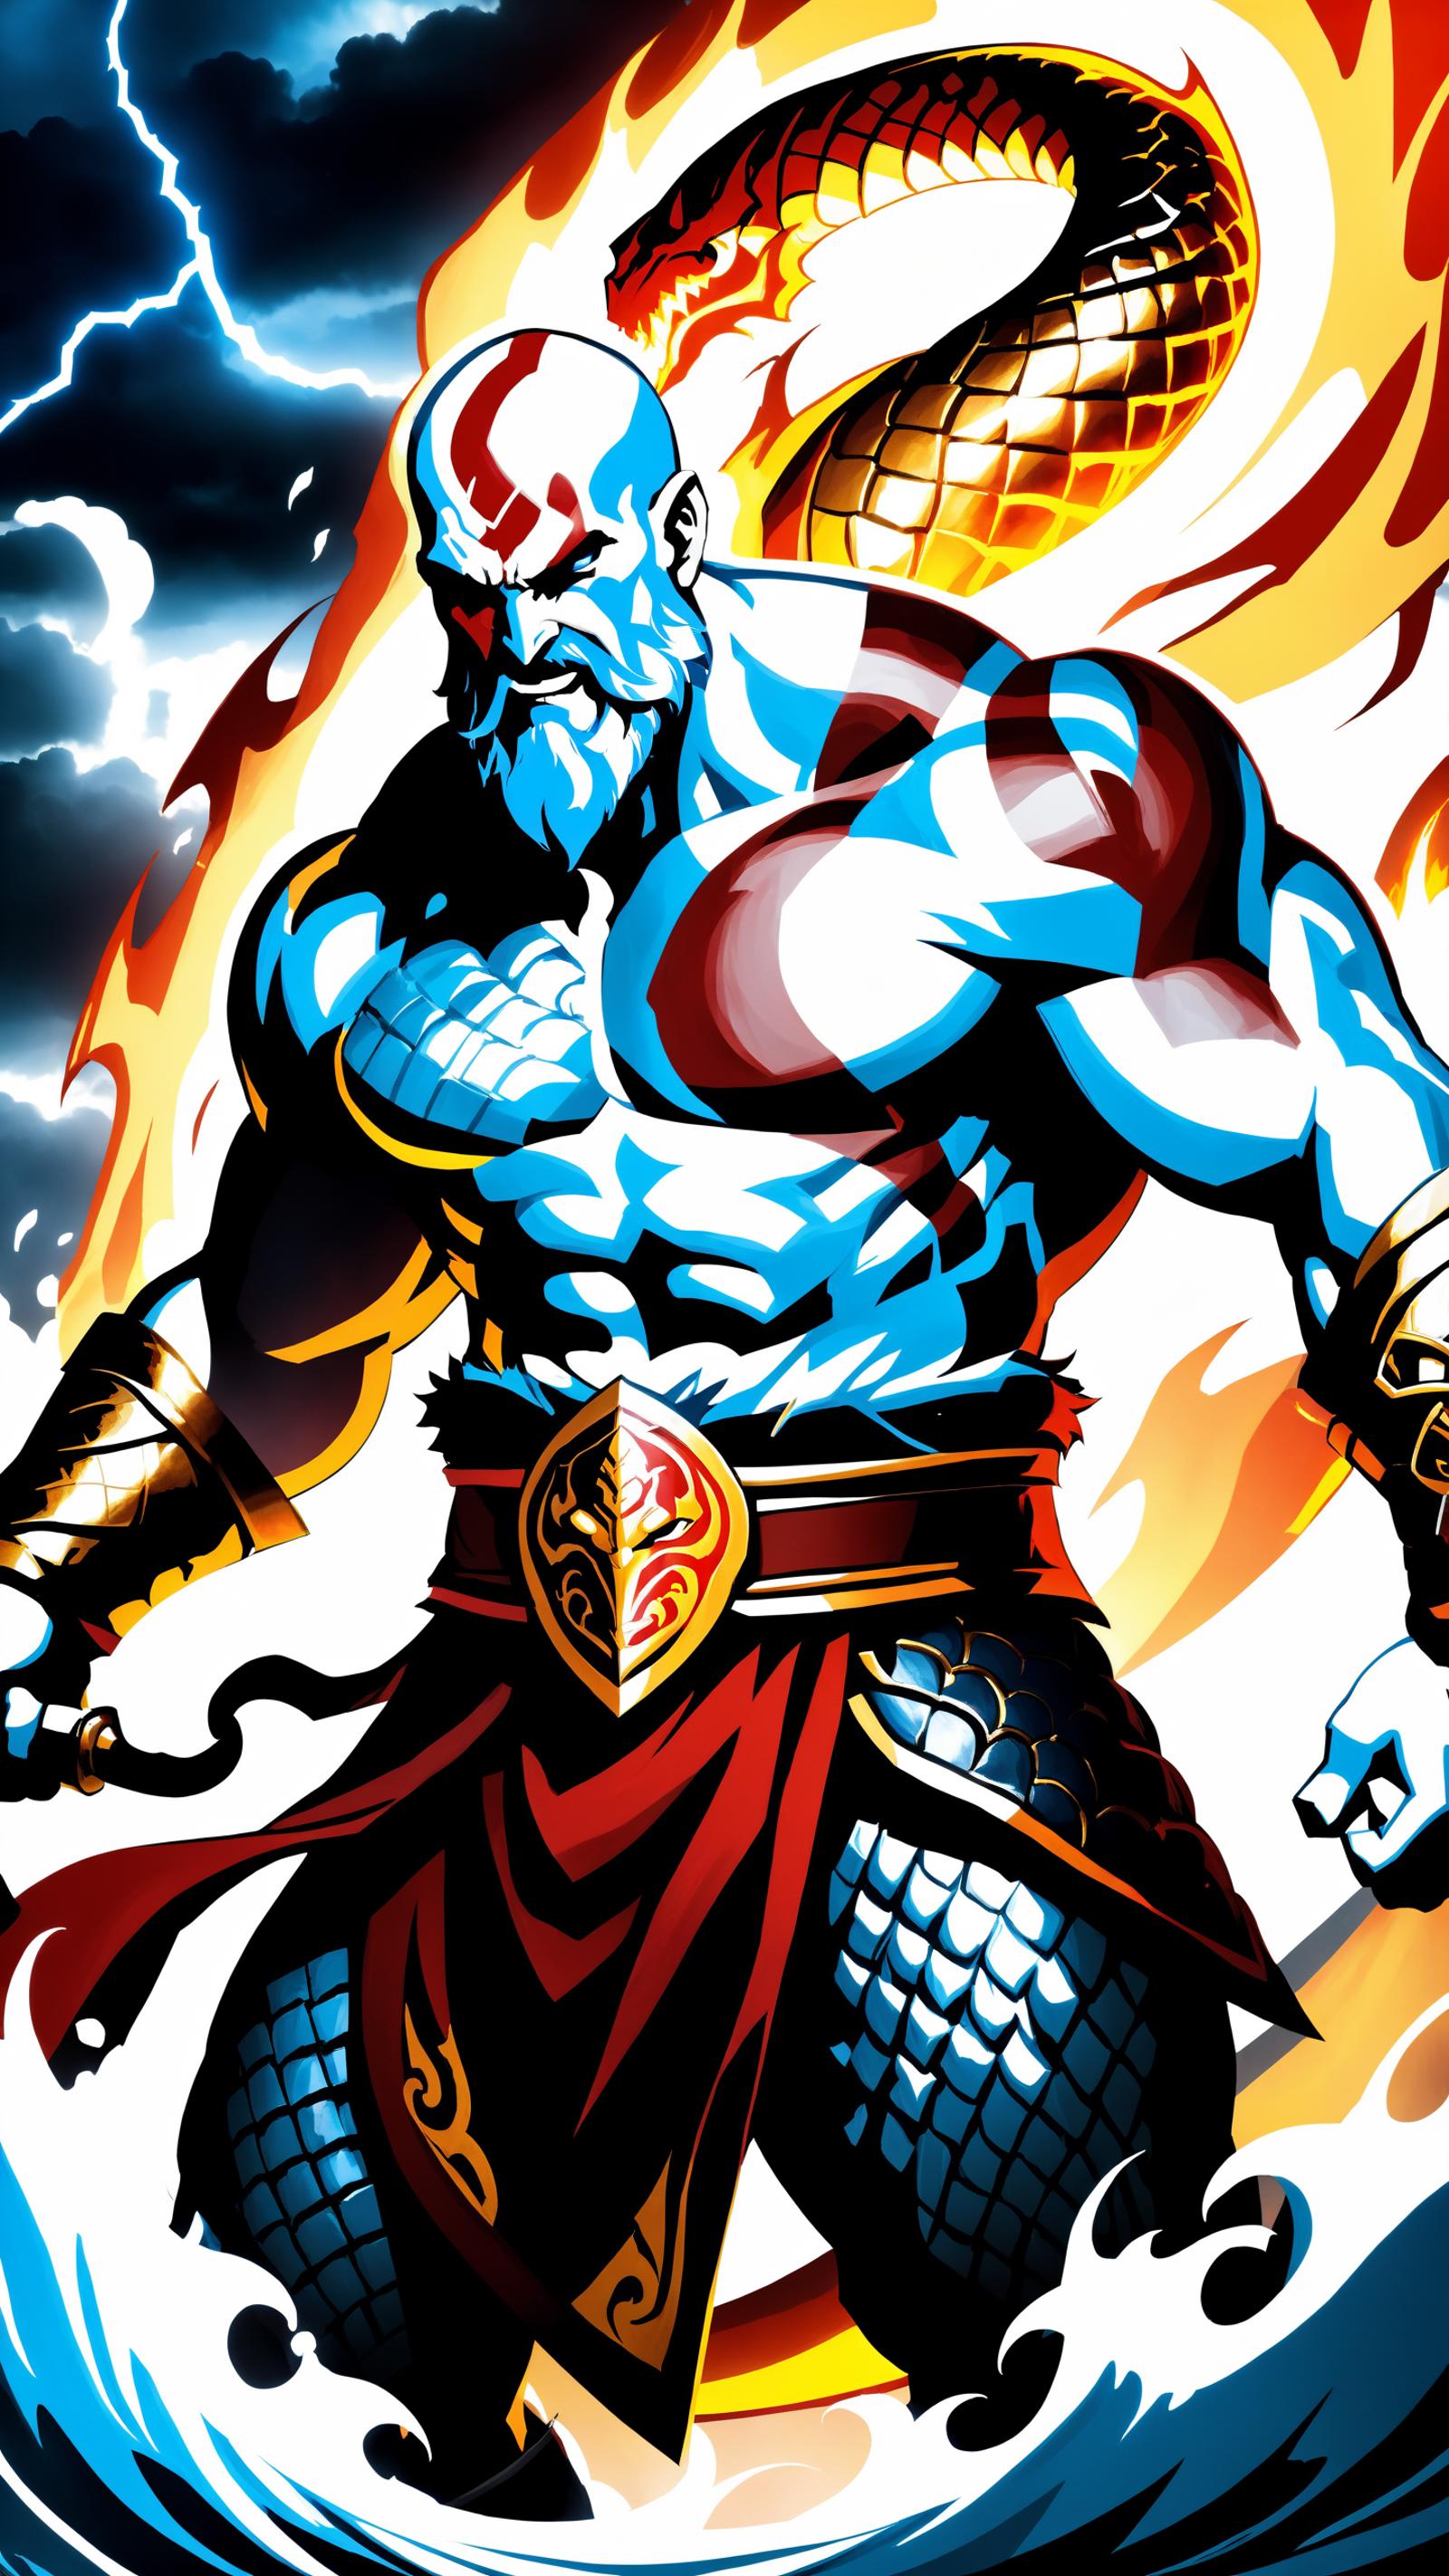 Blue and Red Thor Cartoon Image